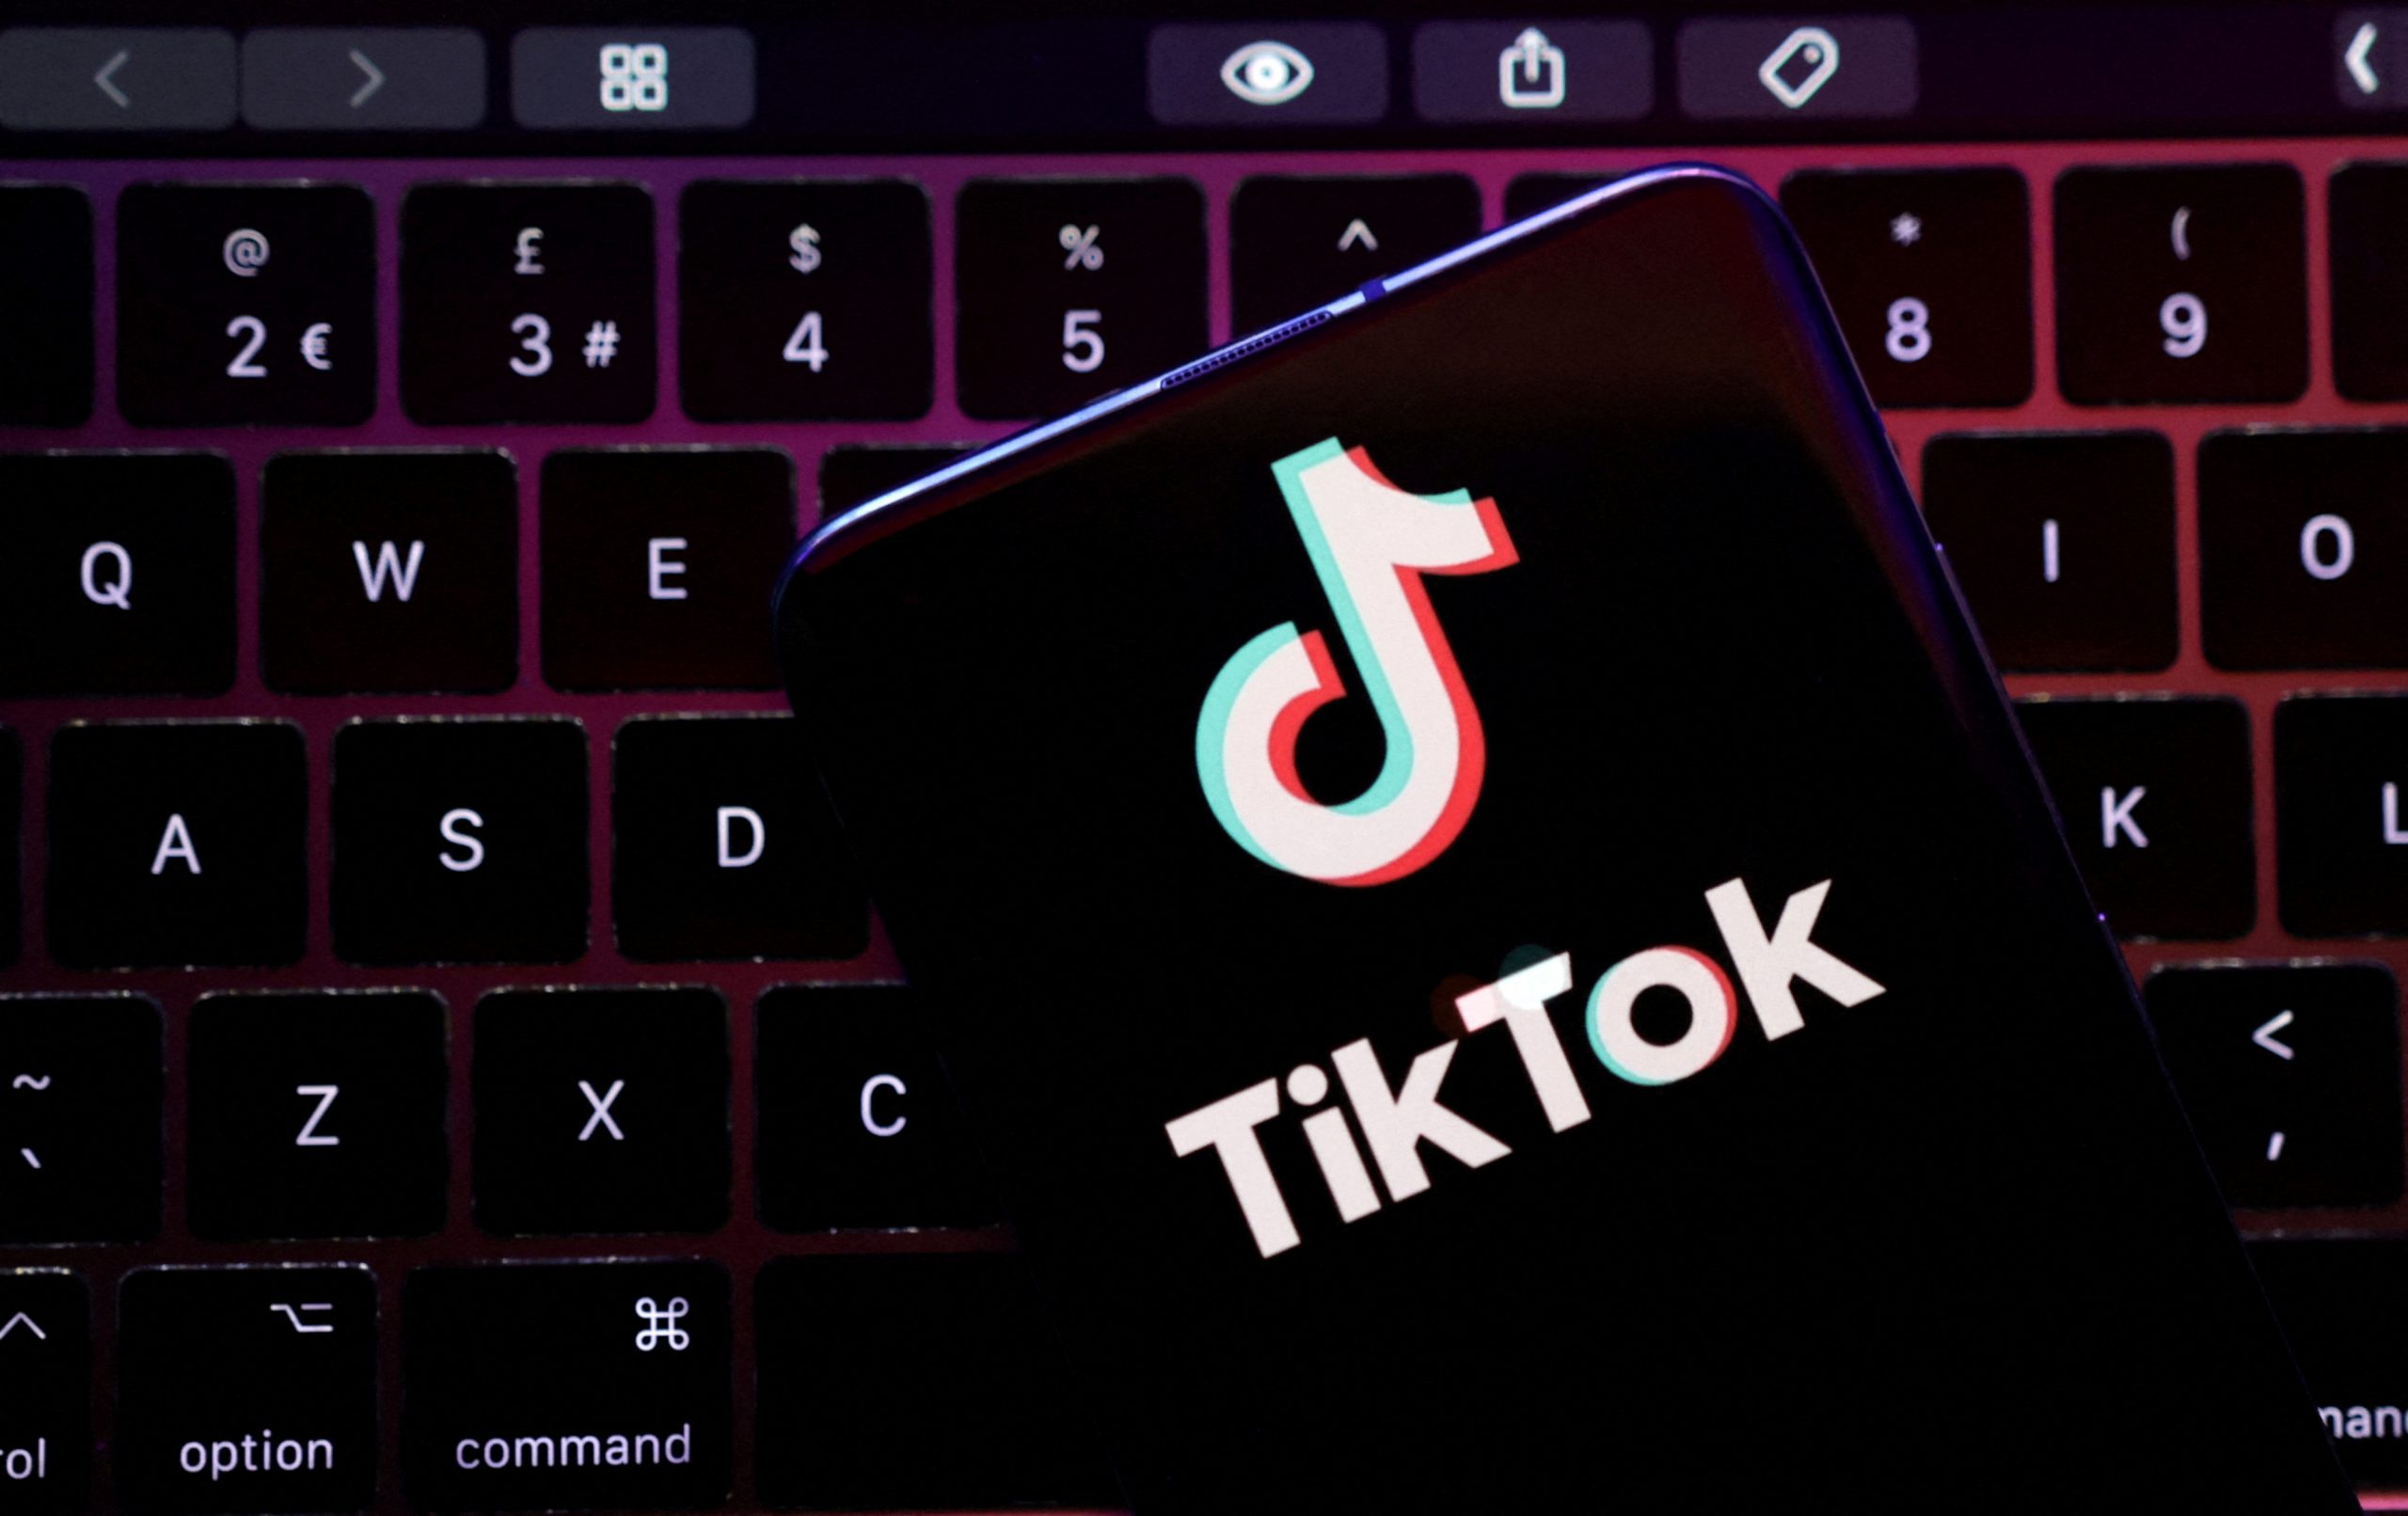 TikTok Sues To Block Law That Could Ban Chinese-Owned App